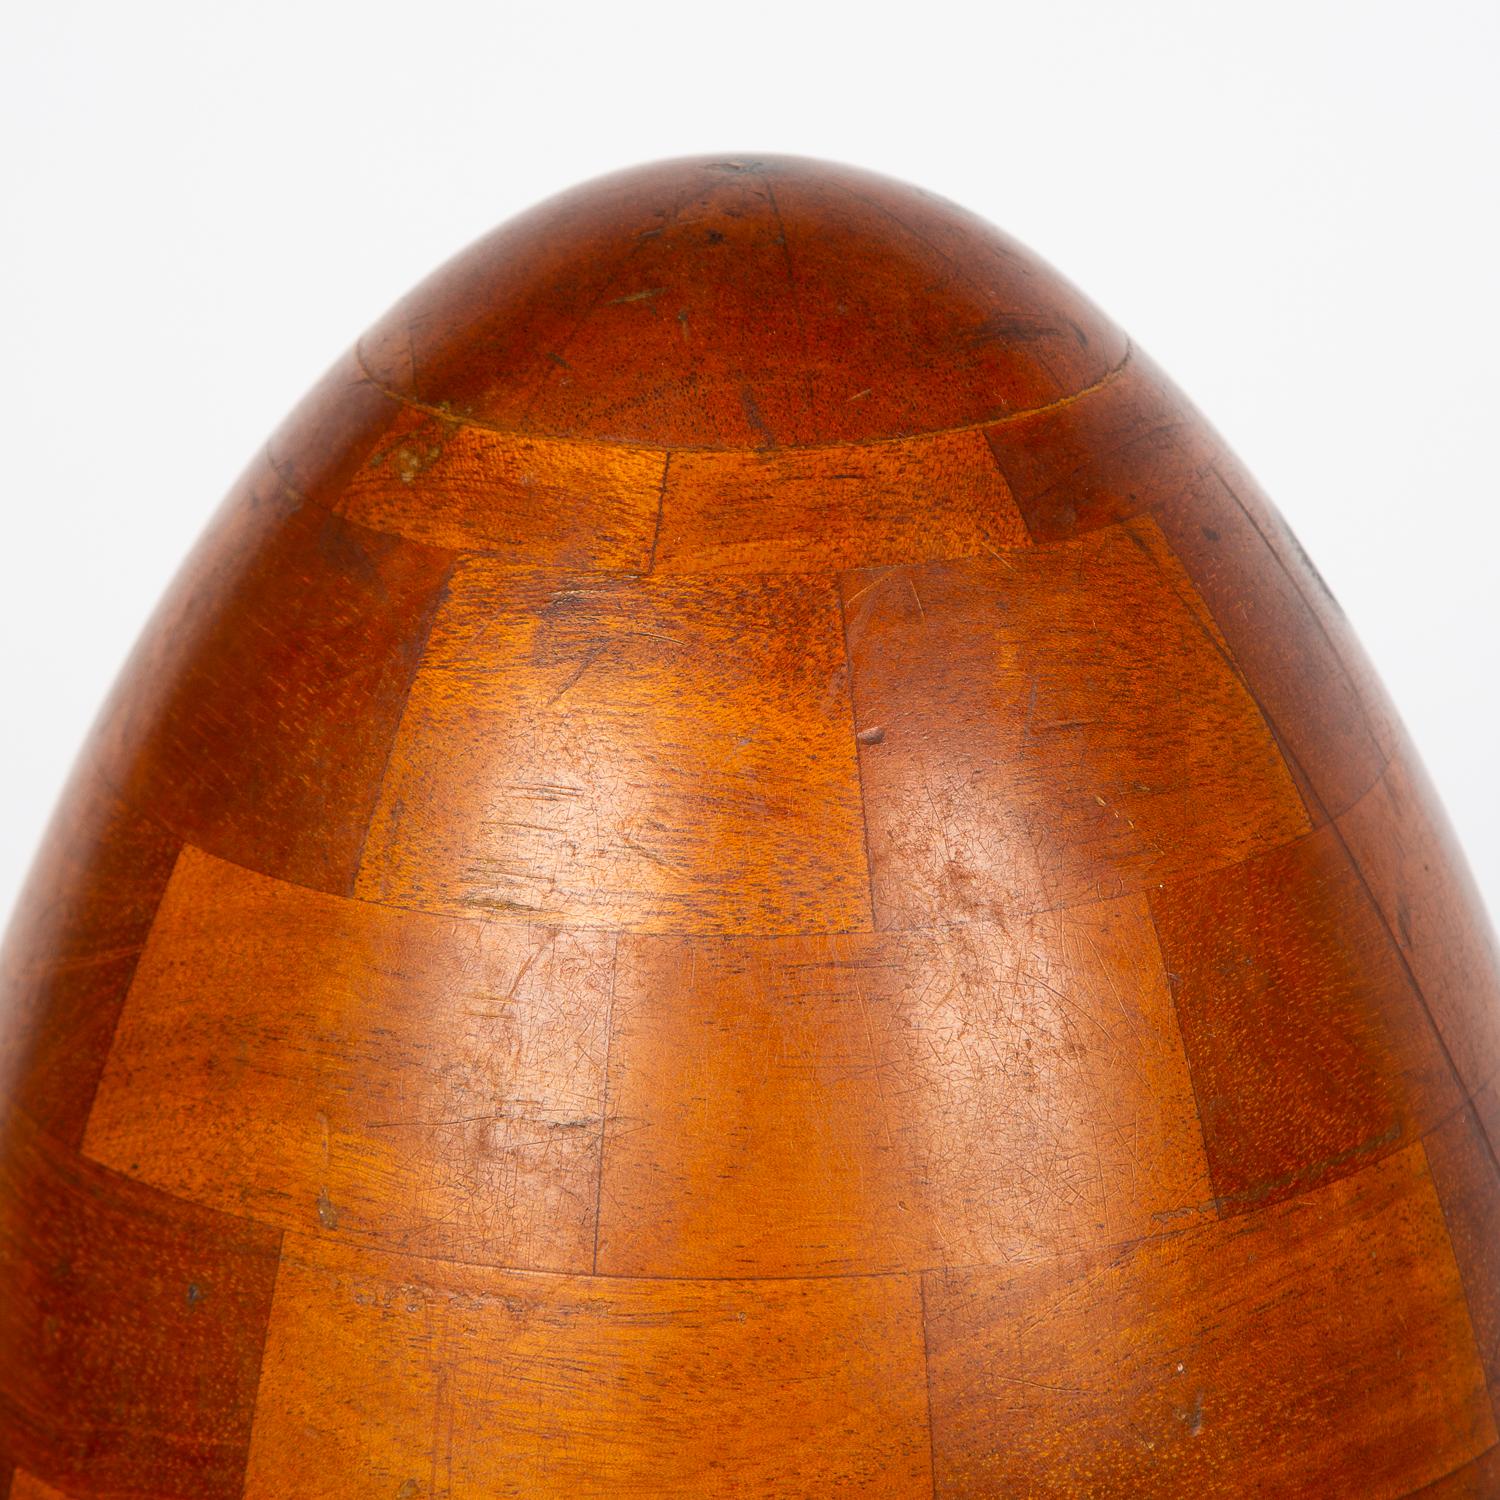 A laminate mahogany prototype design for an aircraft propeller hub, circa 1935.

Measures: Height: 31.5 cm - 12 inches.

Diameter: 23 cm - 9 inches.